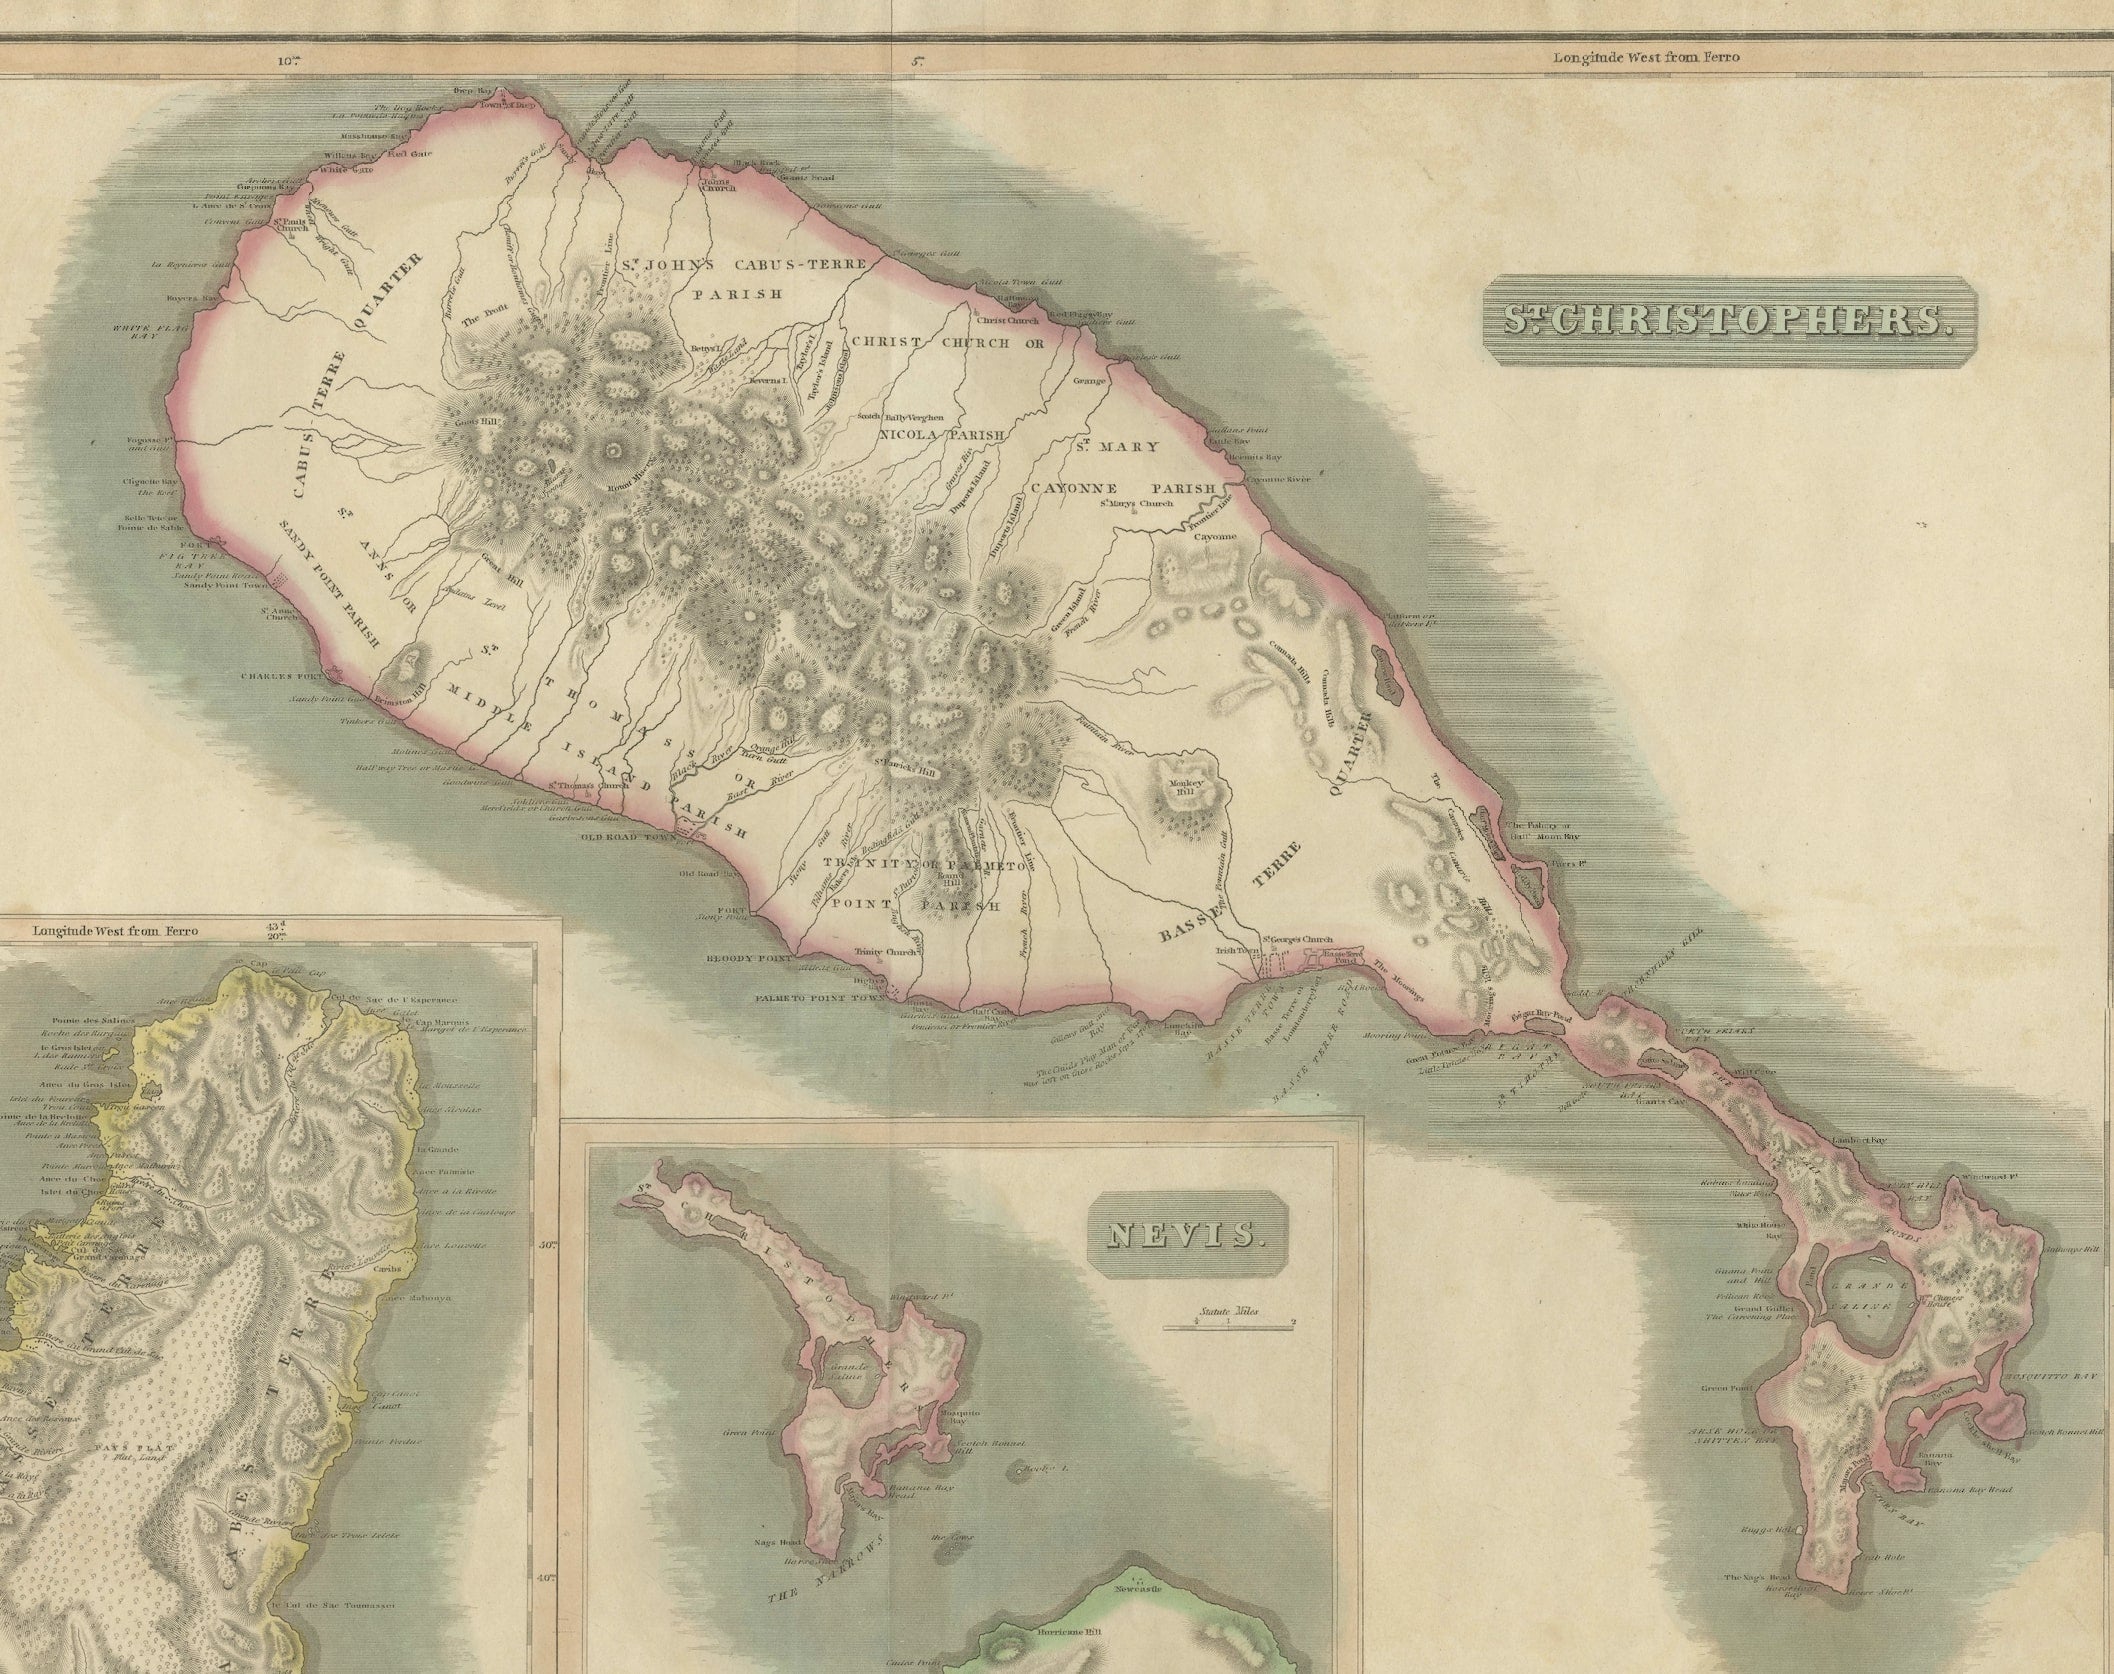 This is an antique map depicting the islands of St. Kitts (St. Christopher's) and Nevis in the West Indies, along with a smaller inset map of St. Lucia. 

The main map focuses on St. Kitts, with detailed topographical features such as mountain